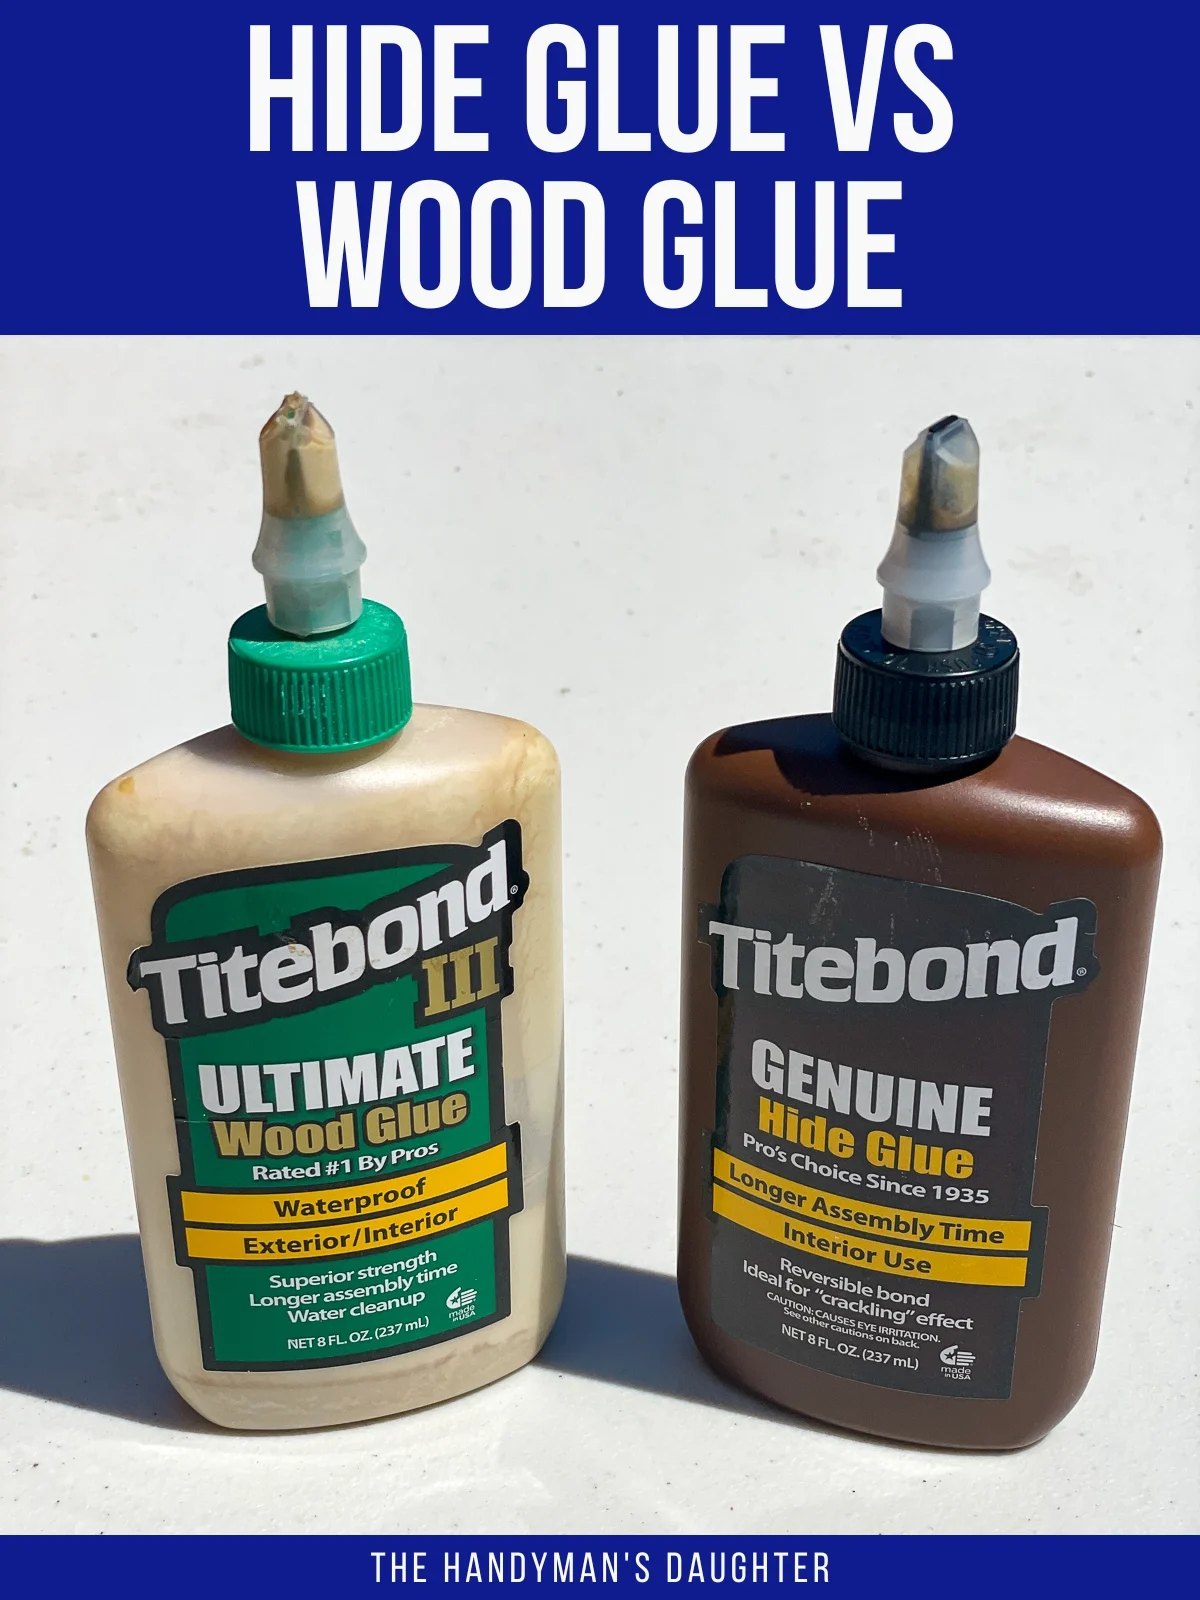 Liquid Hide Glue Advantages. Why It's The Best Wood Glue For Joints